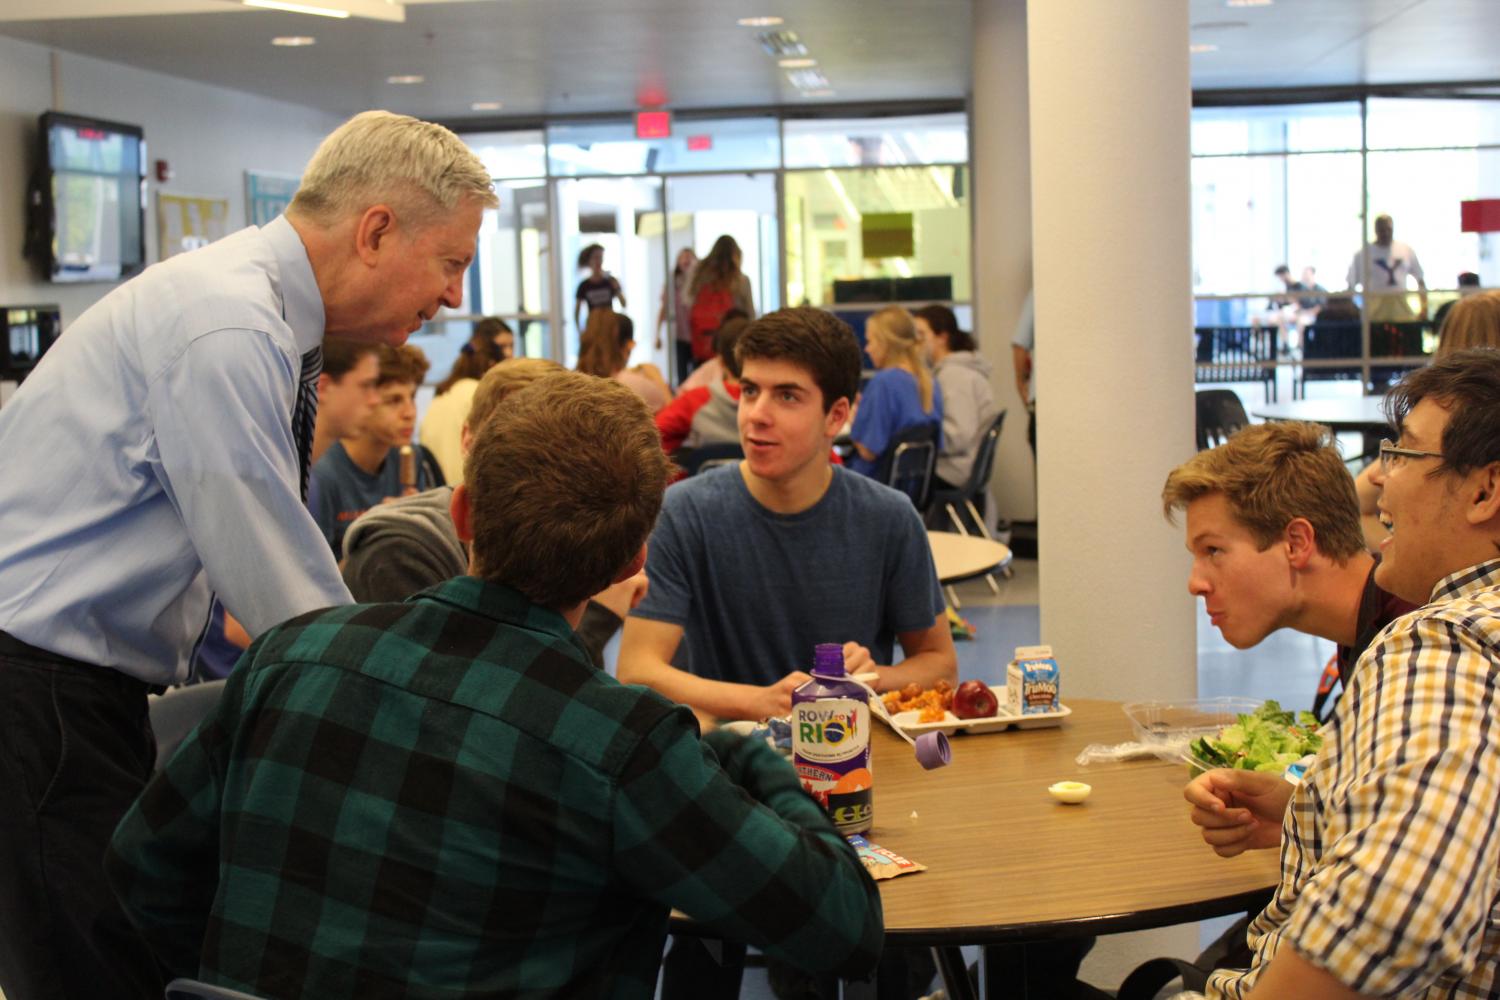 Pasi interacts with students at lunch